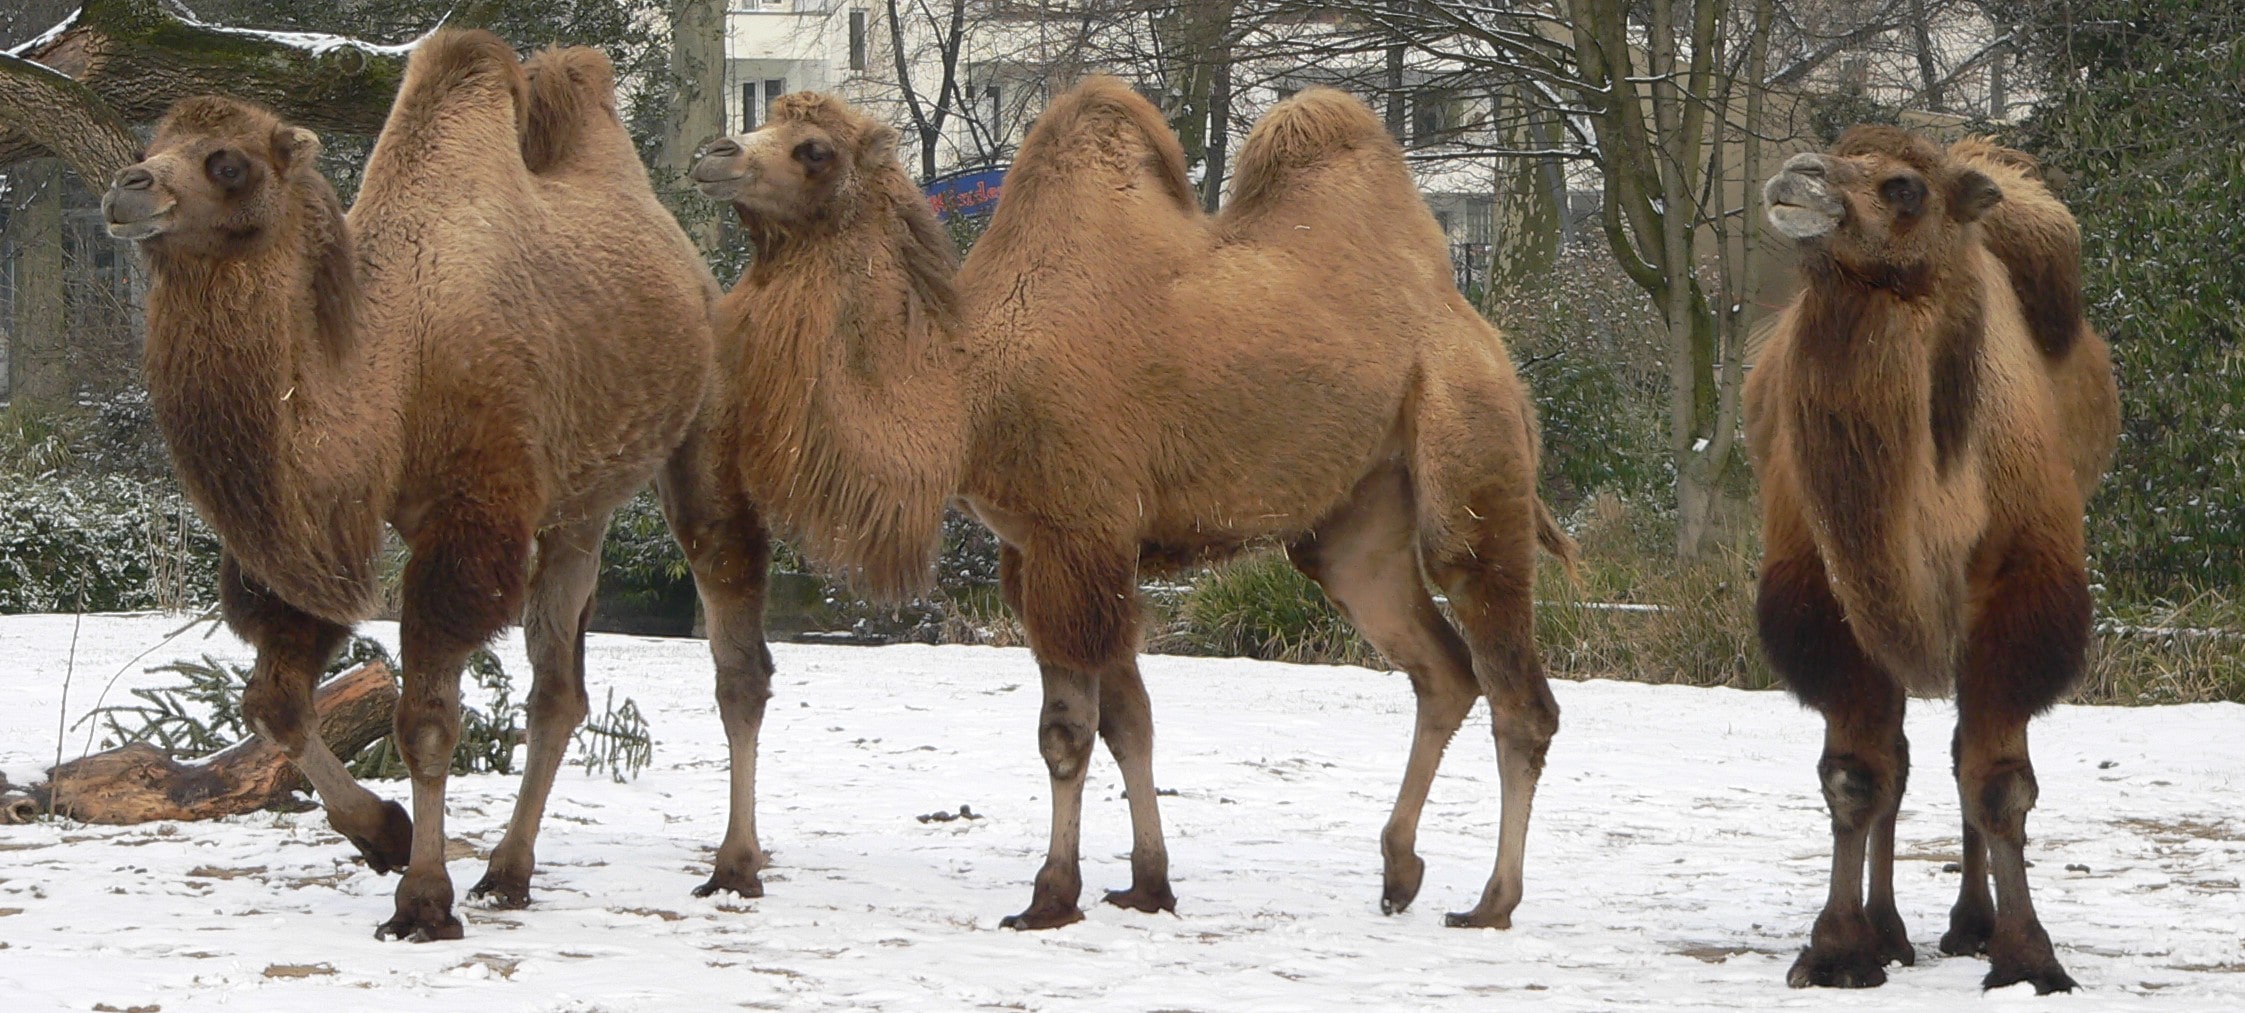 About Bactrian Camels, Two-Humps Mammals Who Like to Wander